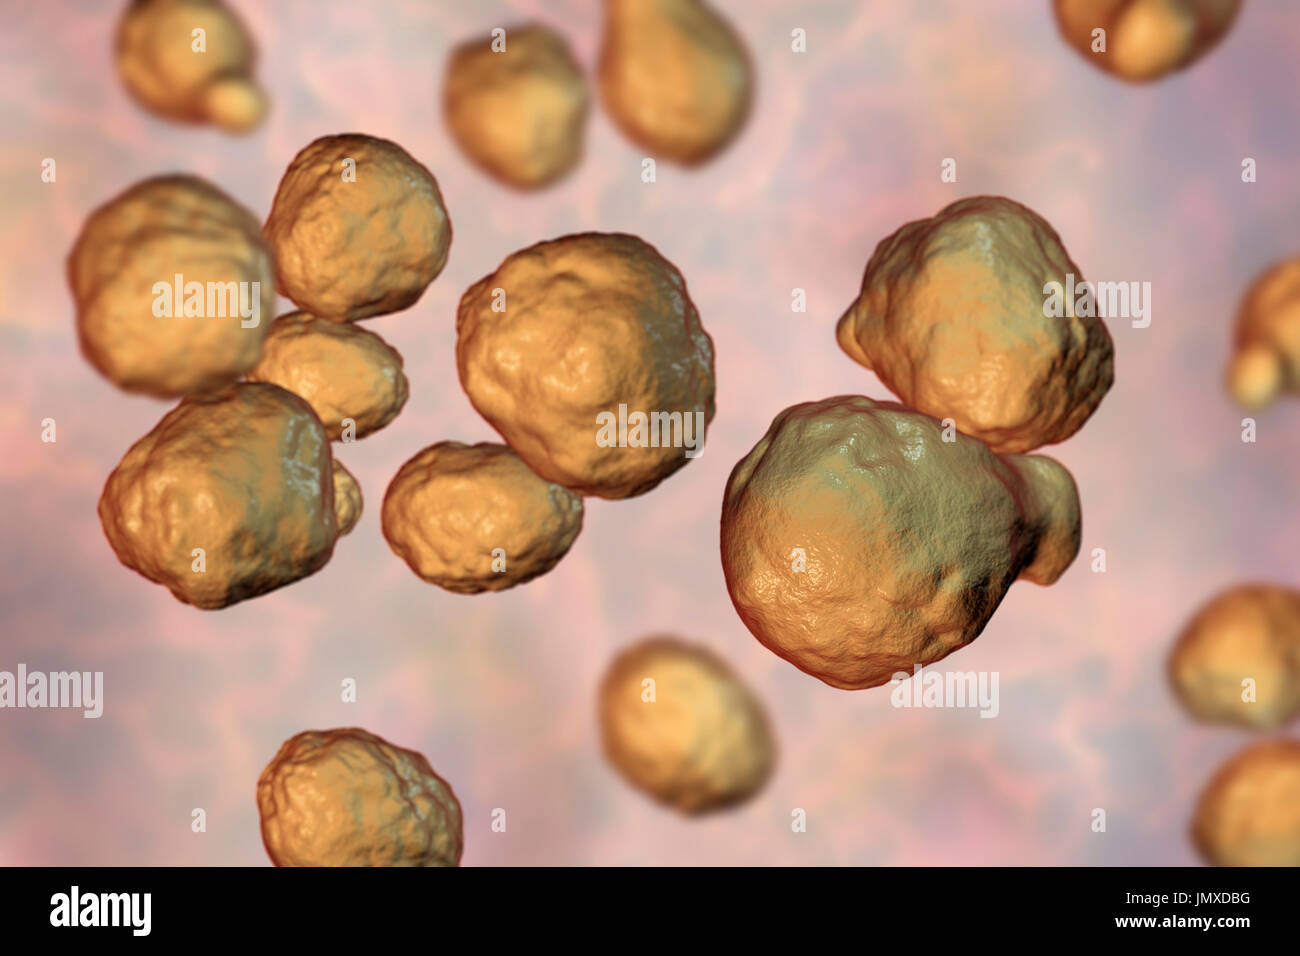 Cryptococcus neoformans fungus, computer illustration. C. neoformans is a yeast-like fungus that reproduces by budding. An acidic mucopolysaccharide capsule completely encloses the fungus. It can cause the disease cryptococcosis, especially in immune deficient patients, such as those with HIV/AIDS (acquired immunodeficiency syndrome). The infection may cause meningitis, and may also be located in the lungs, skin or other body regions. The most common clinical form is meningoencephalitis. It is caused by inhaling the fungus found in soil that has been contaminated by pigeon droppings. Stock Photo